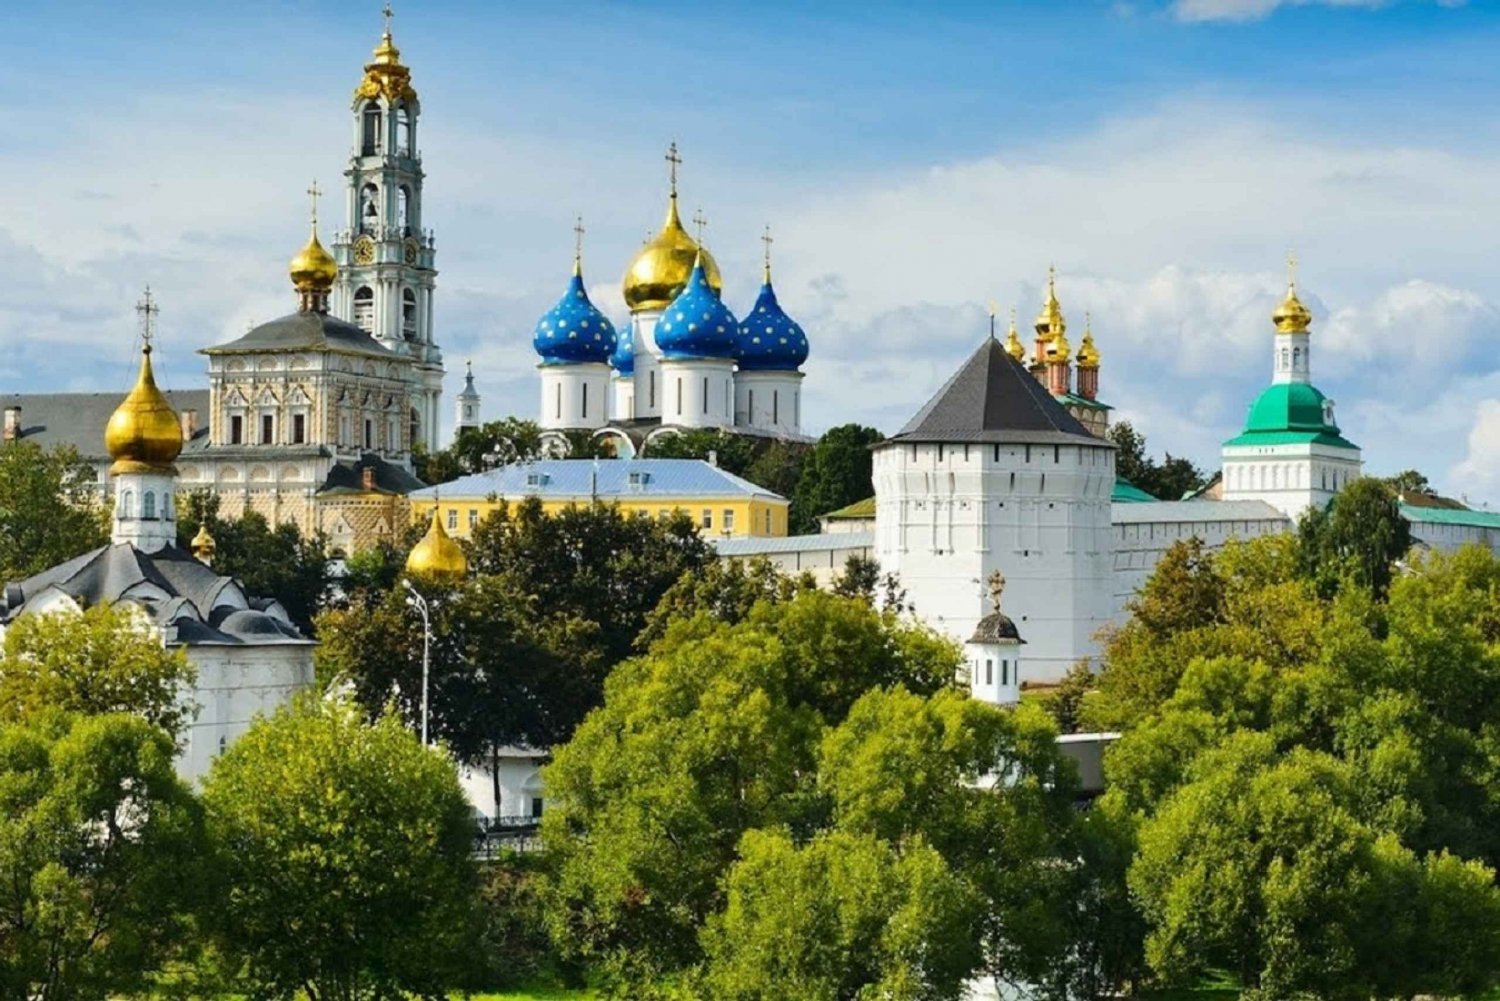 Sergiev Posad: Private Trip to the Pearl of the Golden Ring